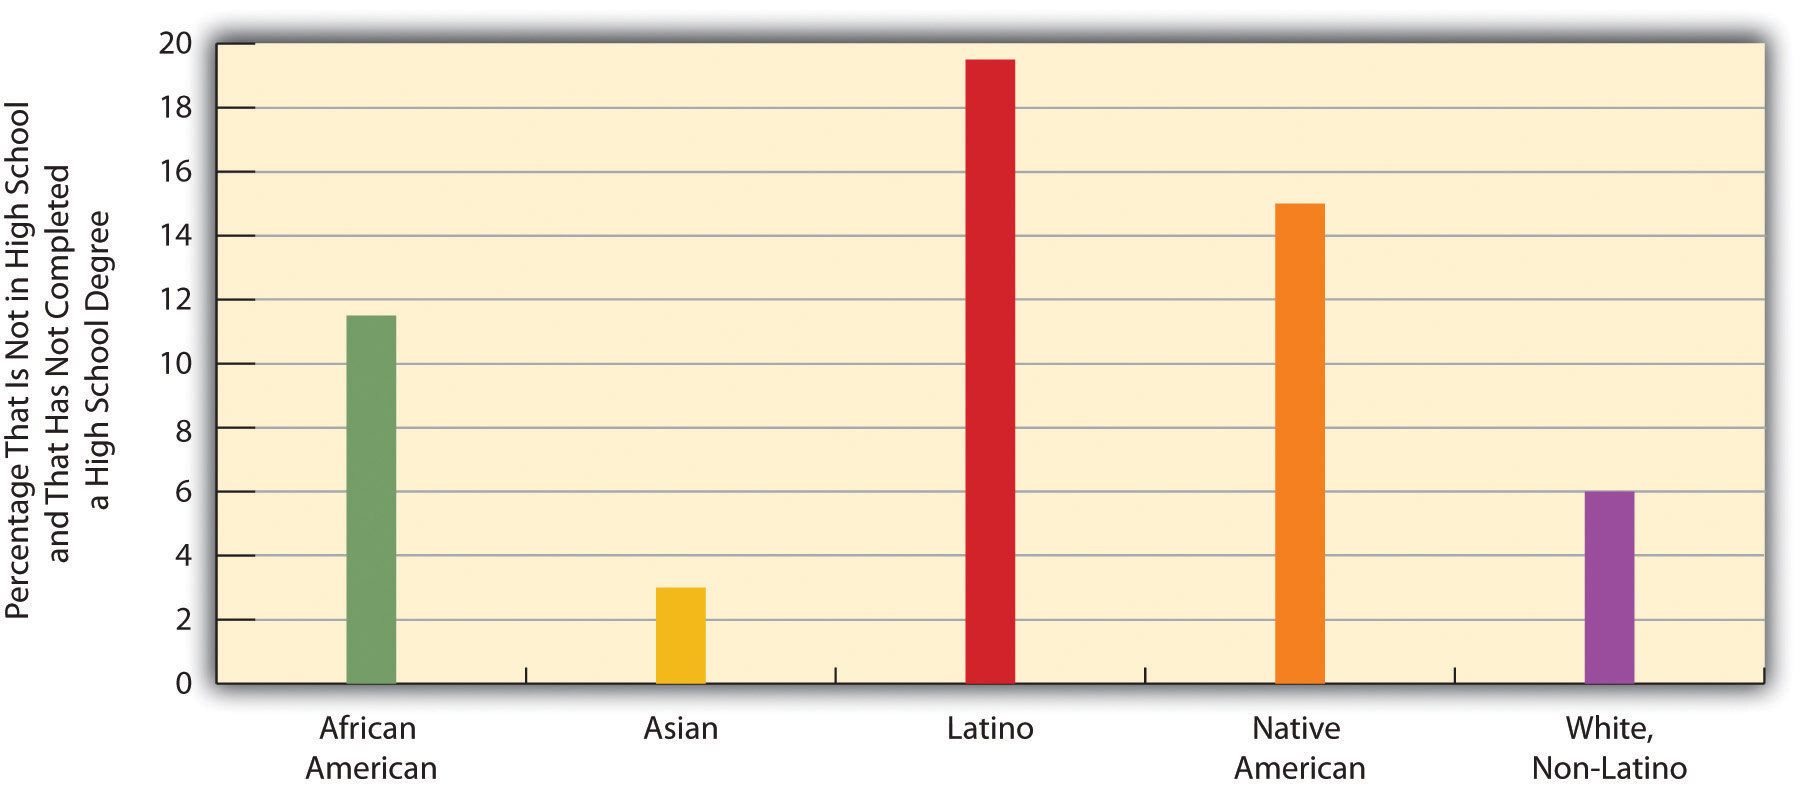 Race, Ethnicity, and High School Dropout Rate, 16-24-Year-Olds, 2007